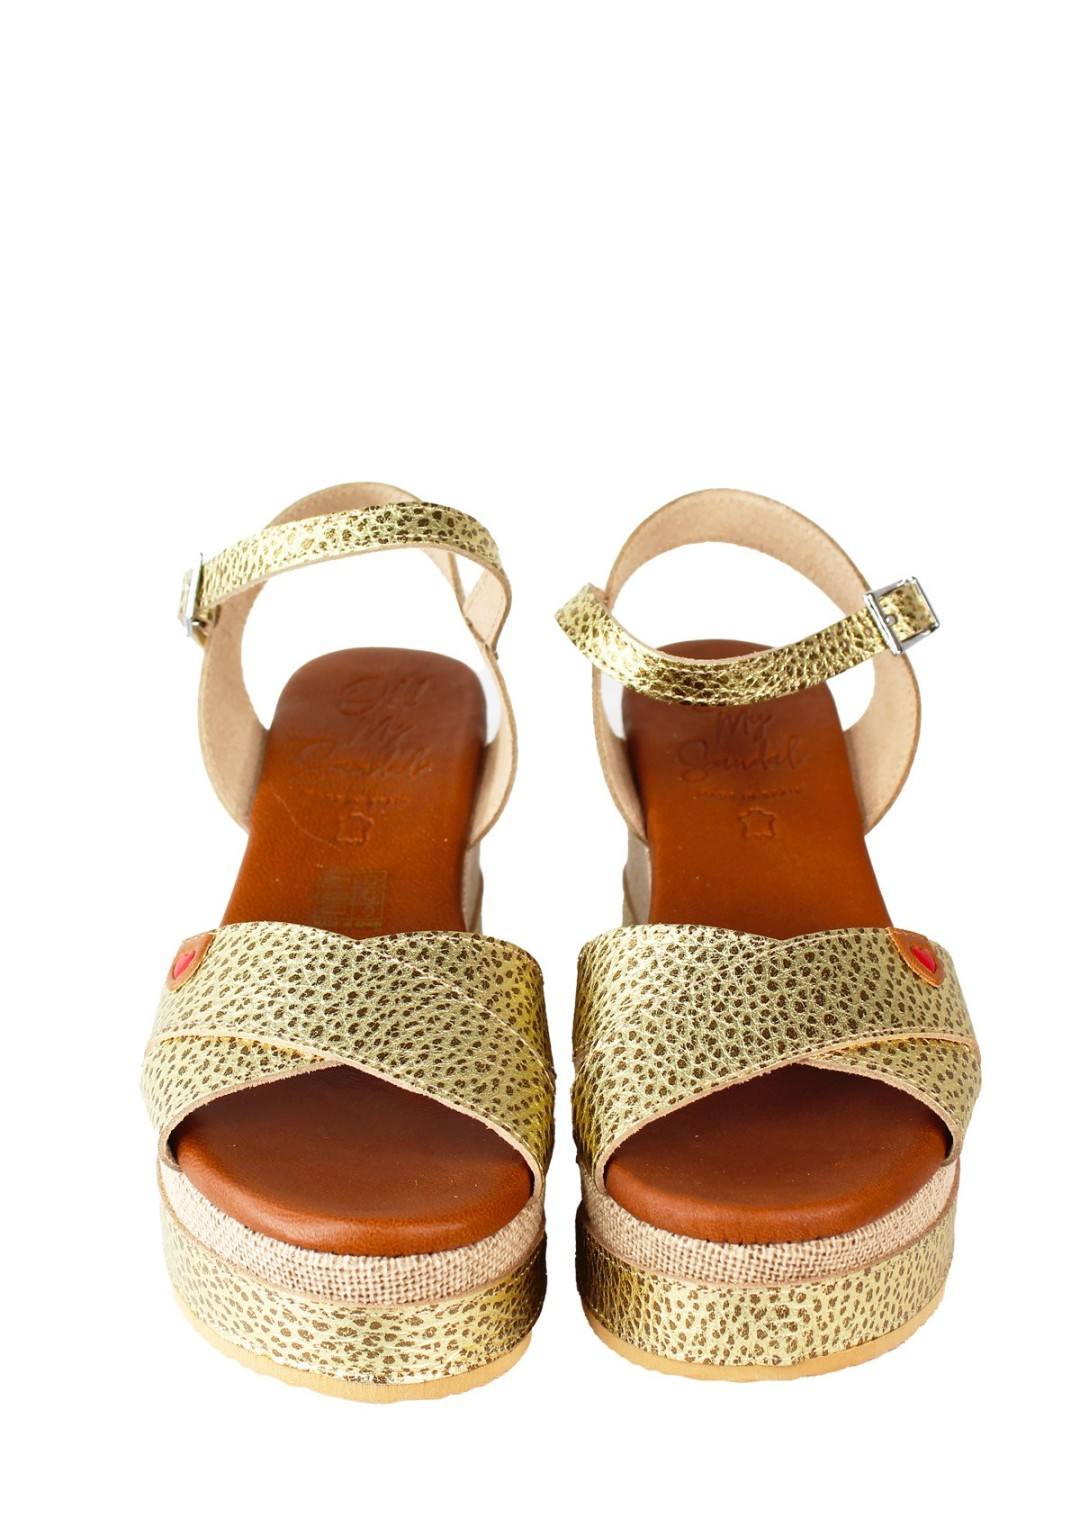 Oh! My Sandals - Fasce Incrocio - Donna - 5249